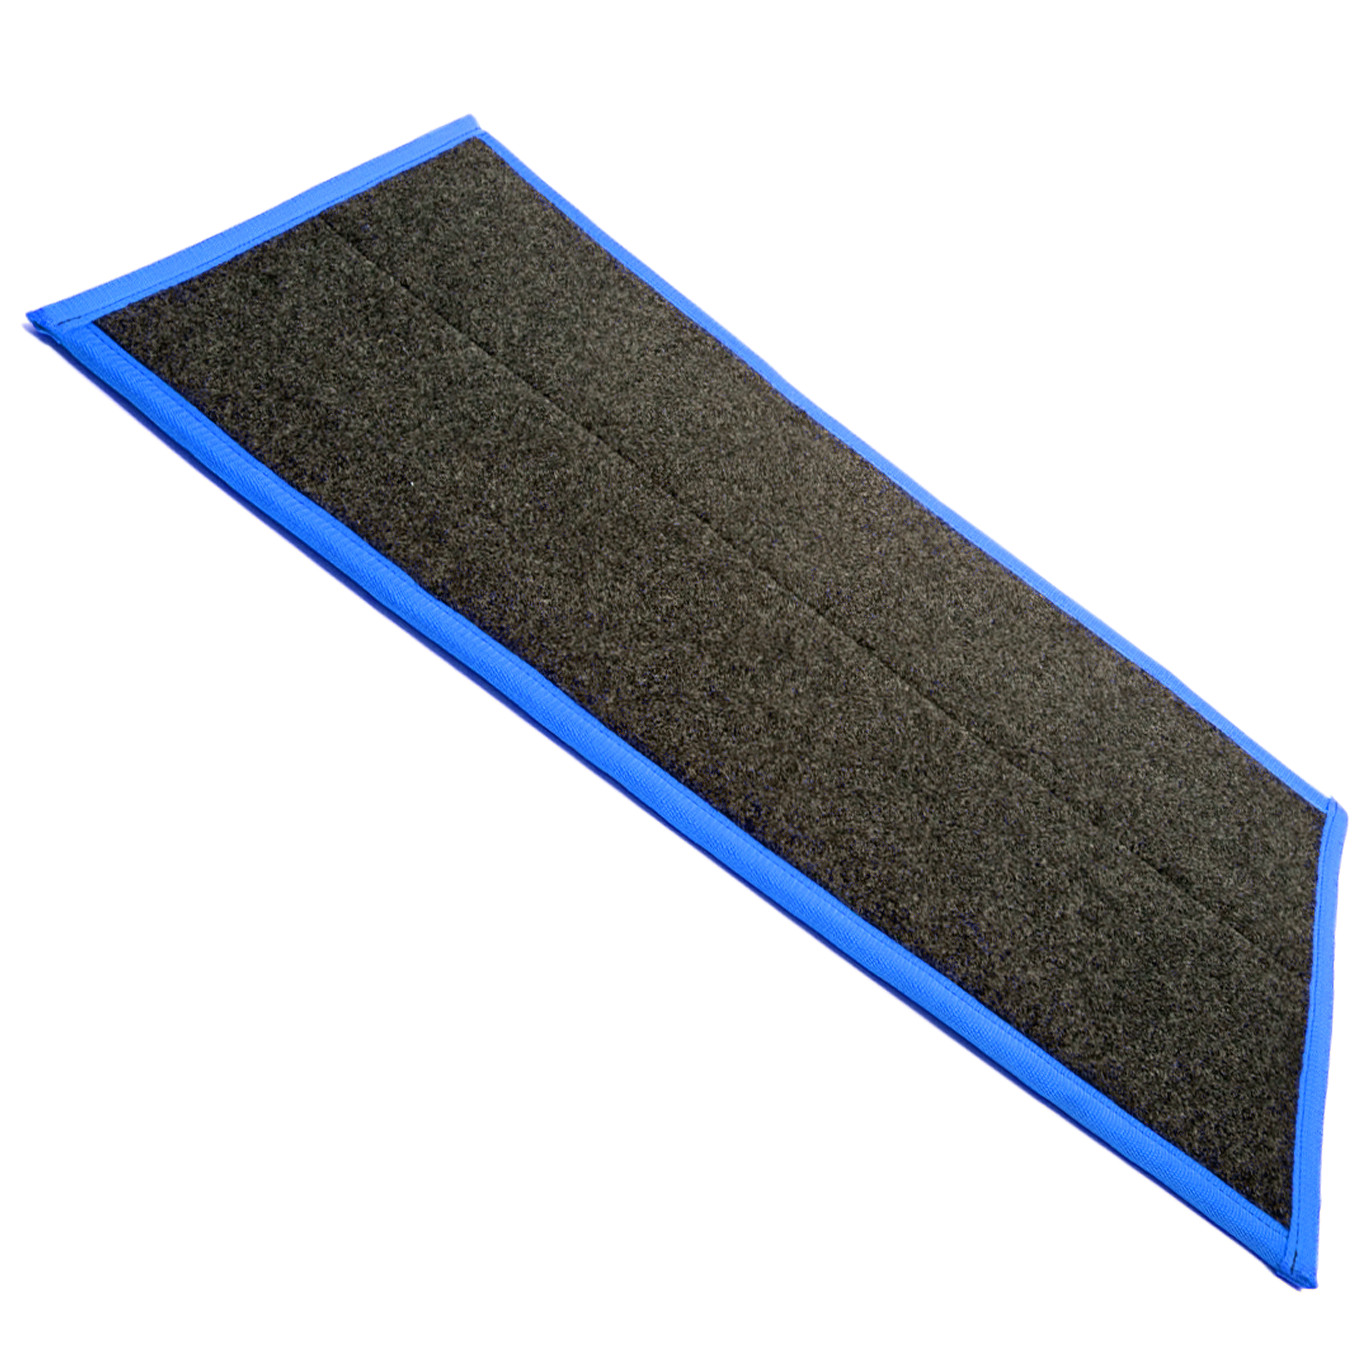 Detail view for PureTrack Replacement Pad with Blue Trim. Disinfecting Shoe Mat System.